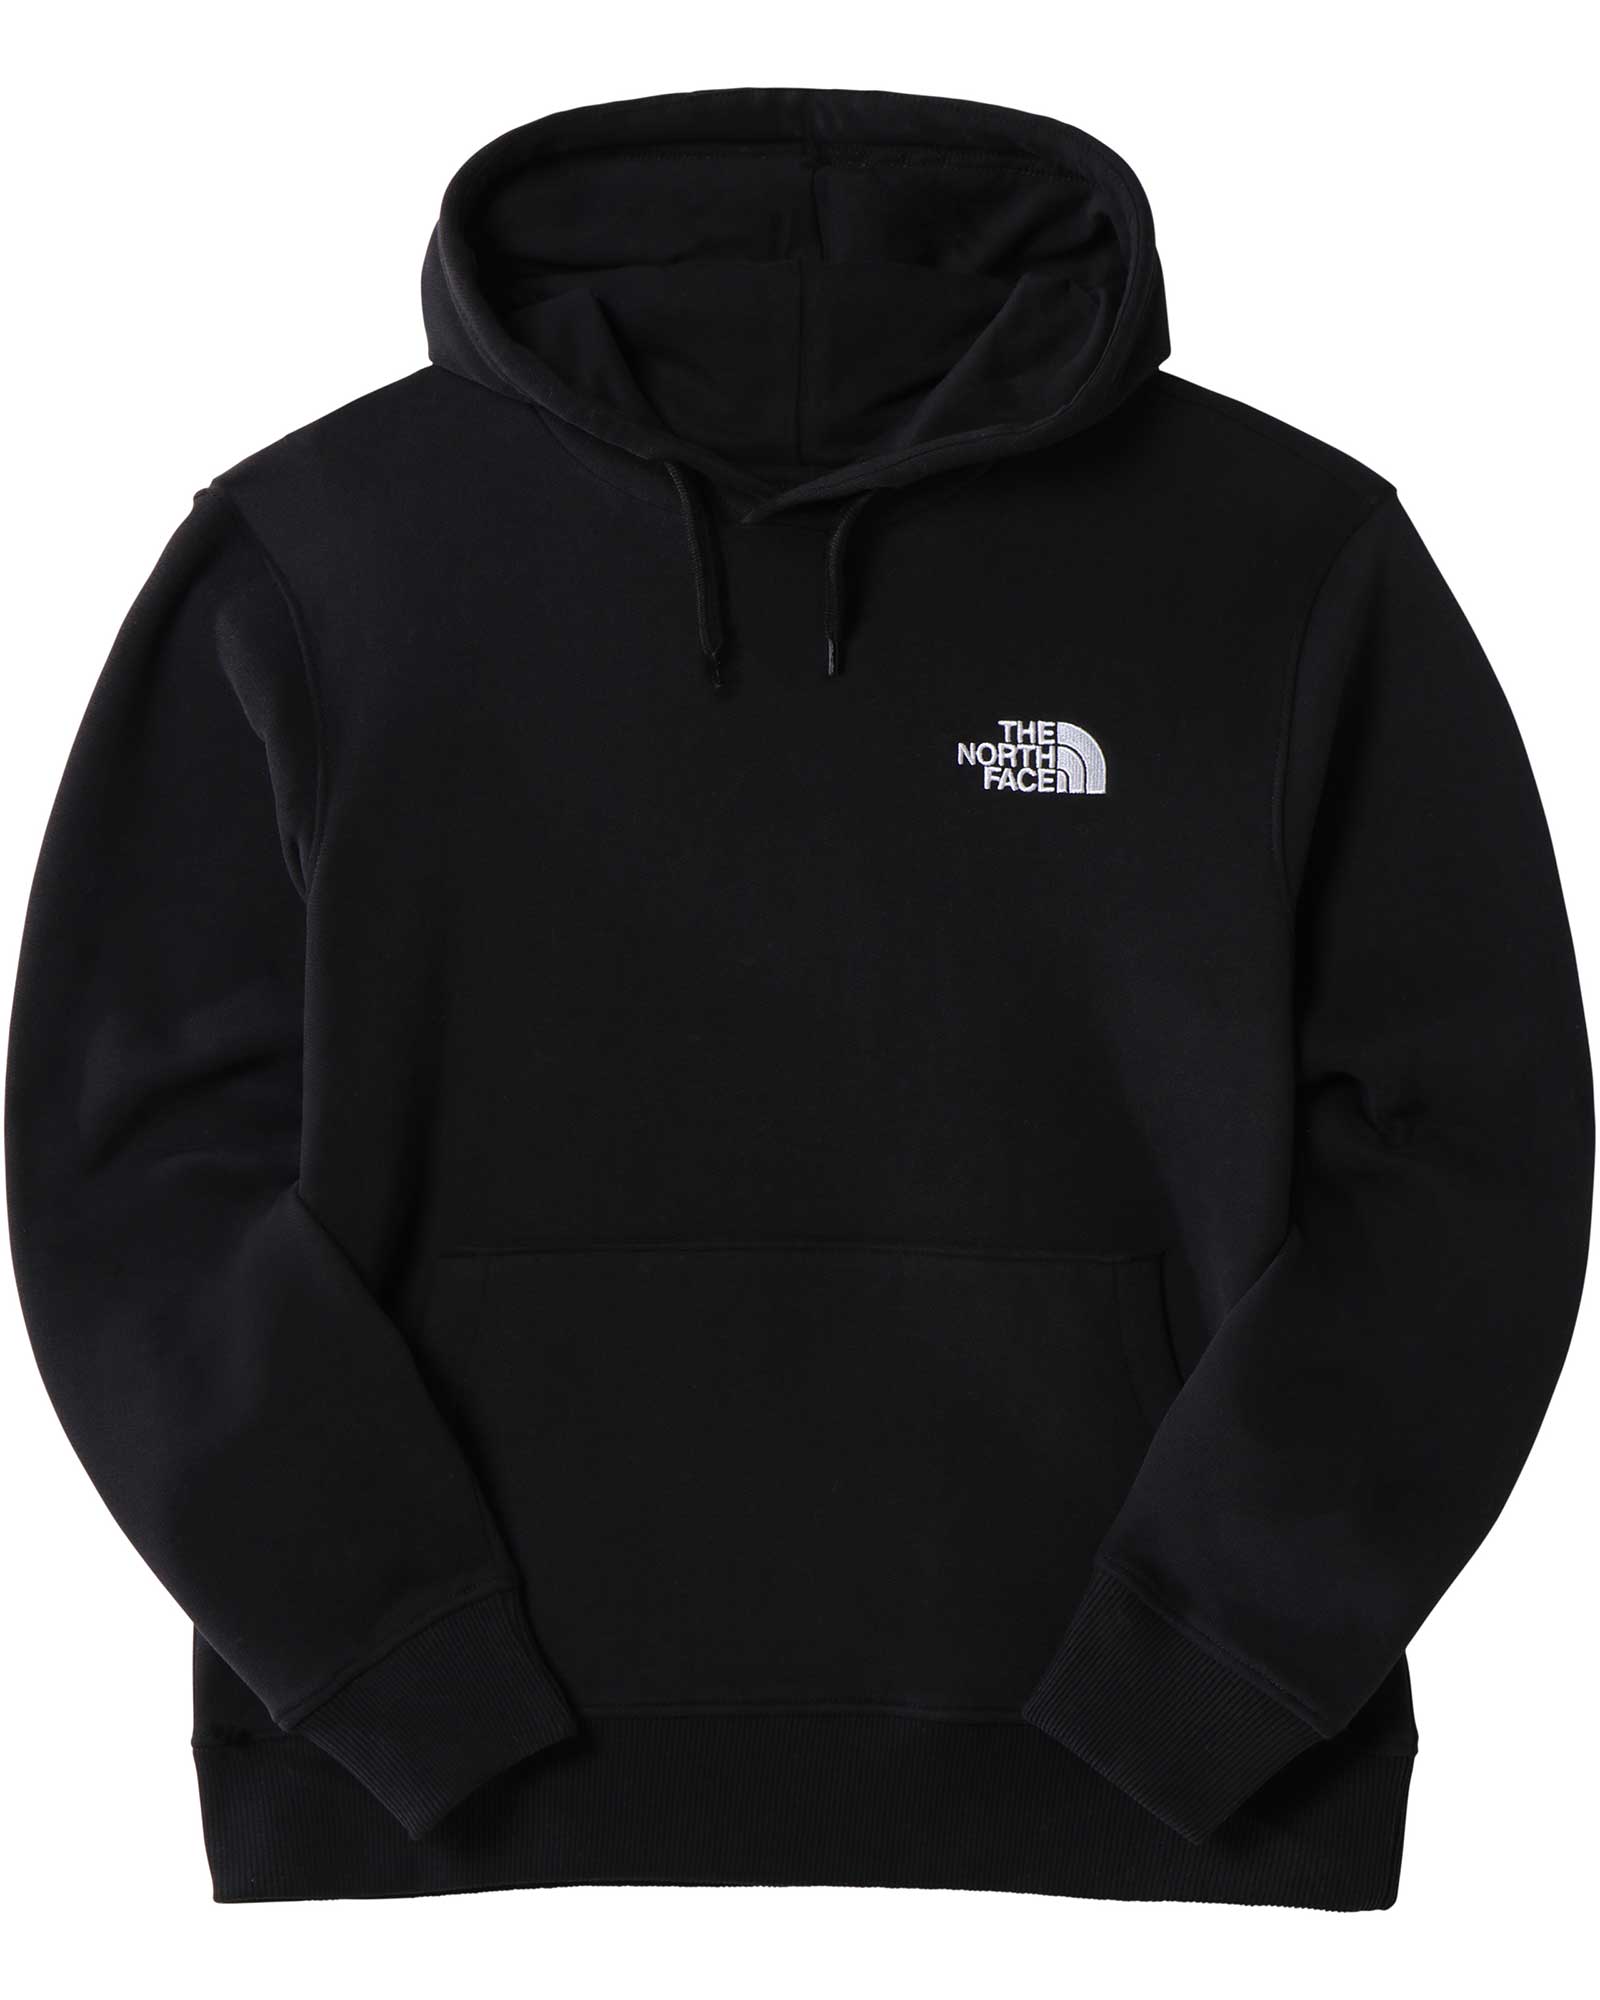 The North Face Kids Oversized Hoodie